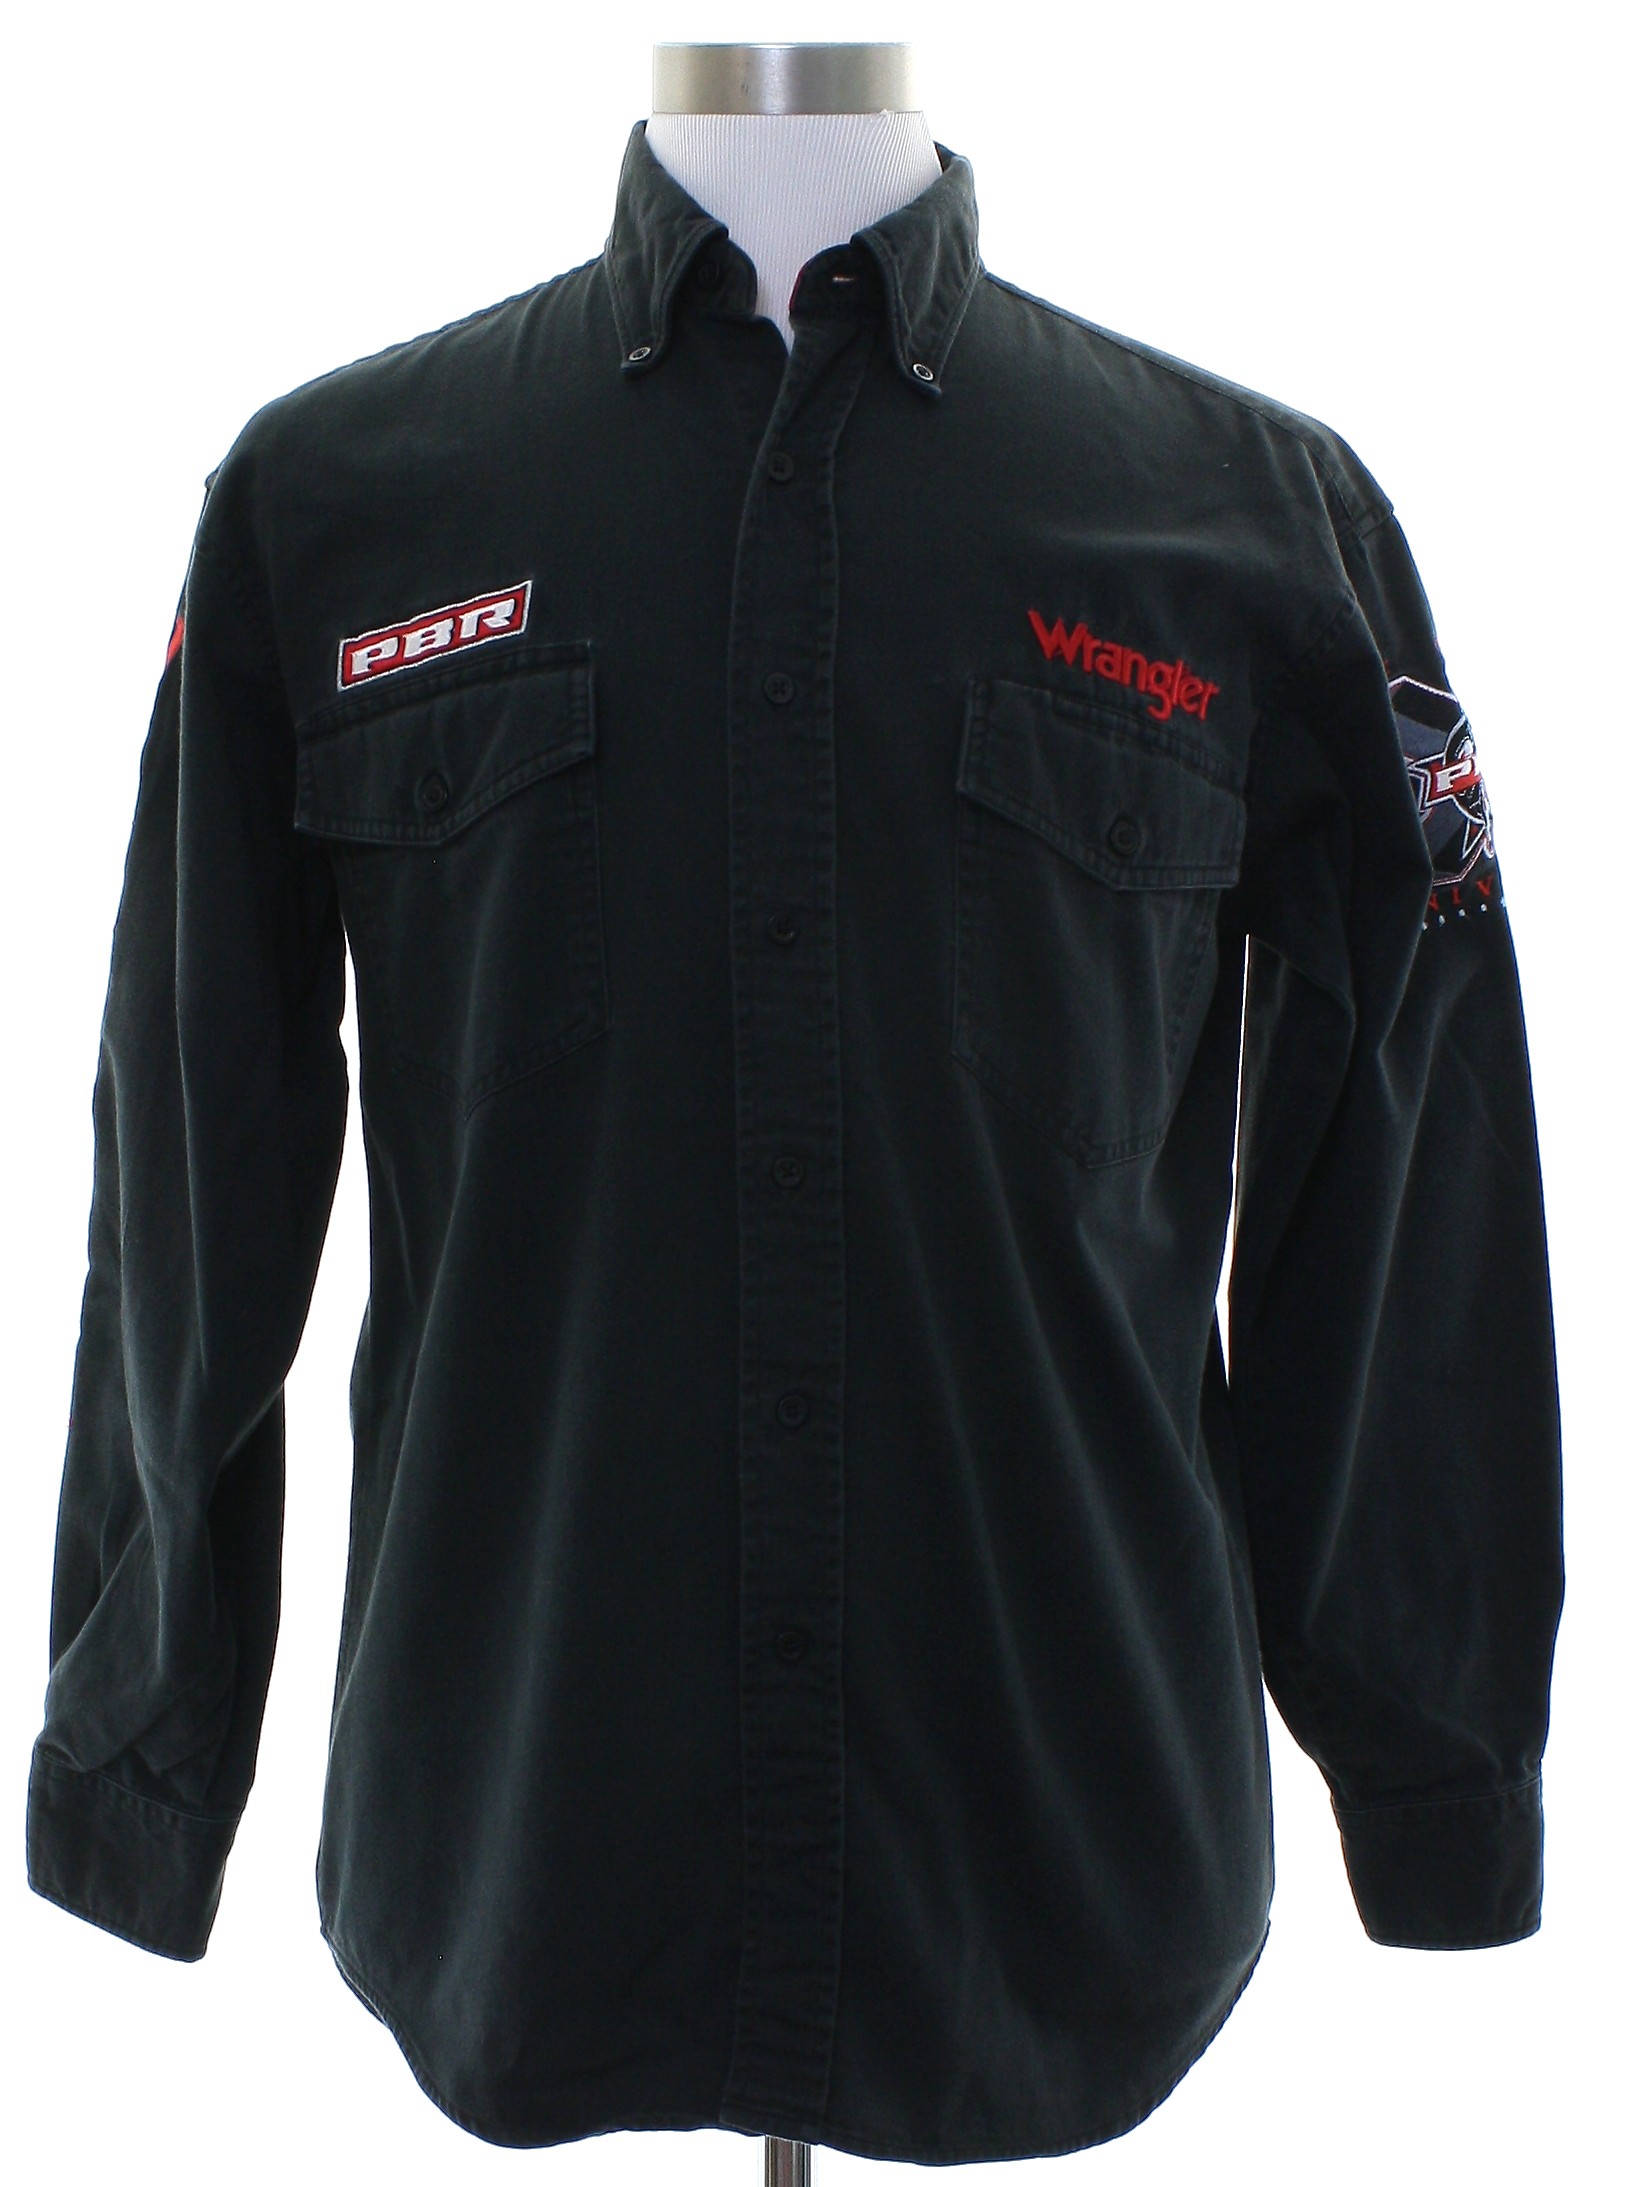 Western Shirt: 90s -Wrangler- Mens faded black background heavy cotton  longsleeve western shirt. (Made in China) button up front. -Wrangler-  embroidered in red above left pocket and on right sleeve, PBR patch